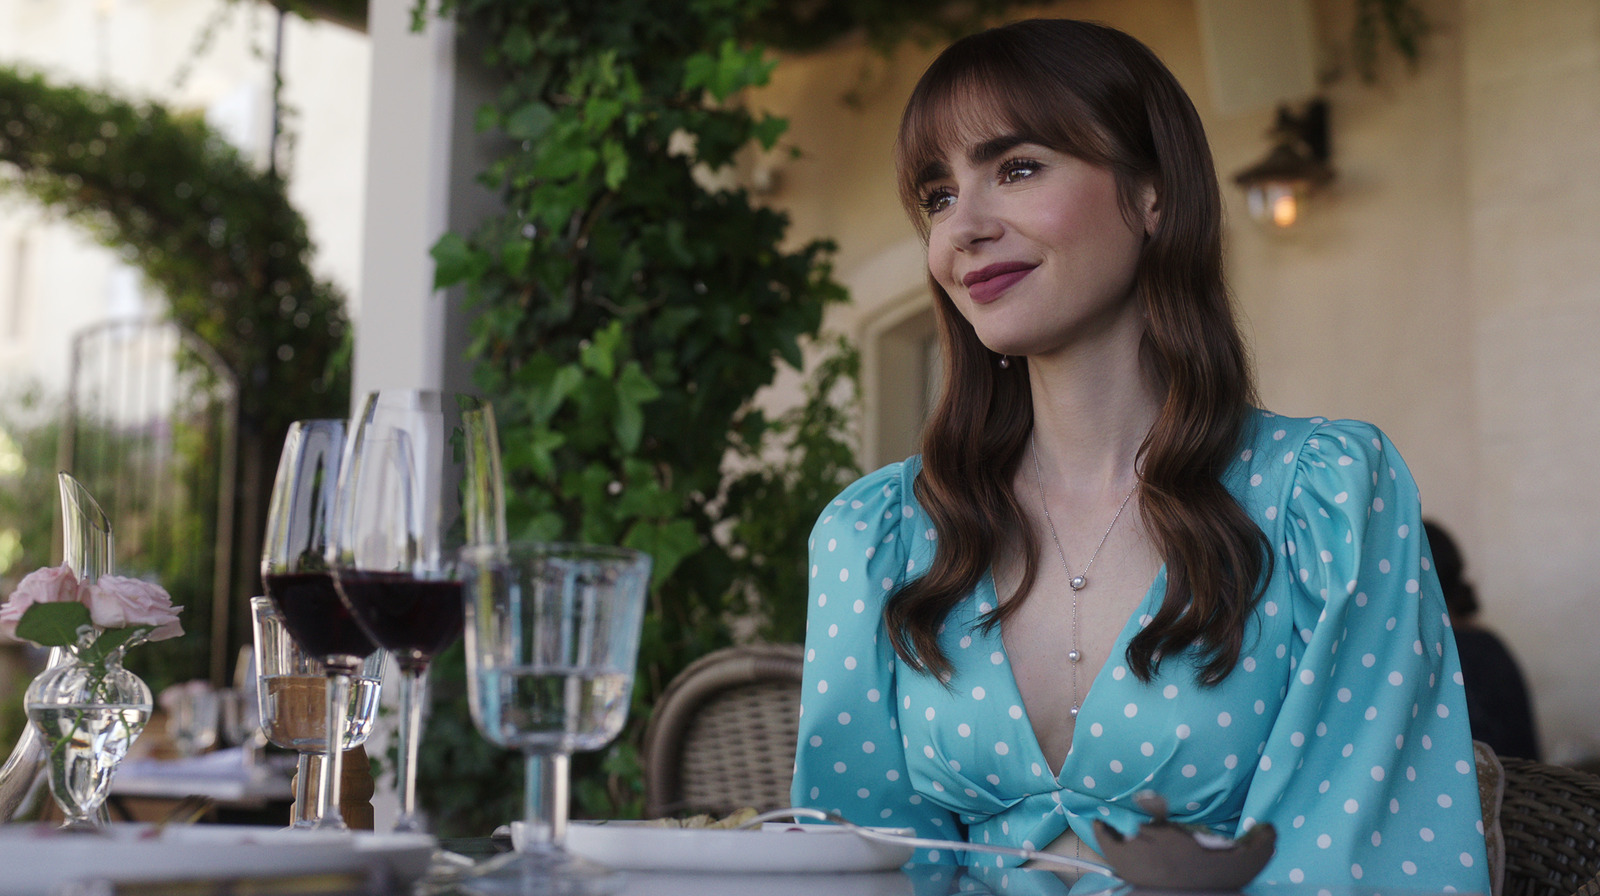 Emily says au revoir to Paris in the trailer for Emily In Paris